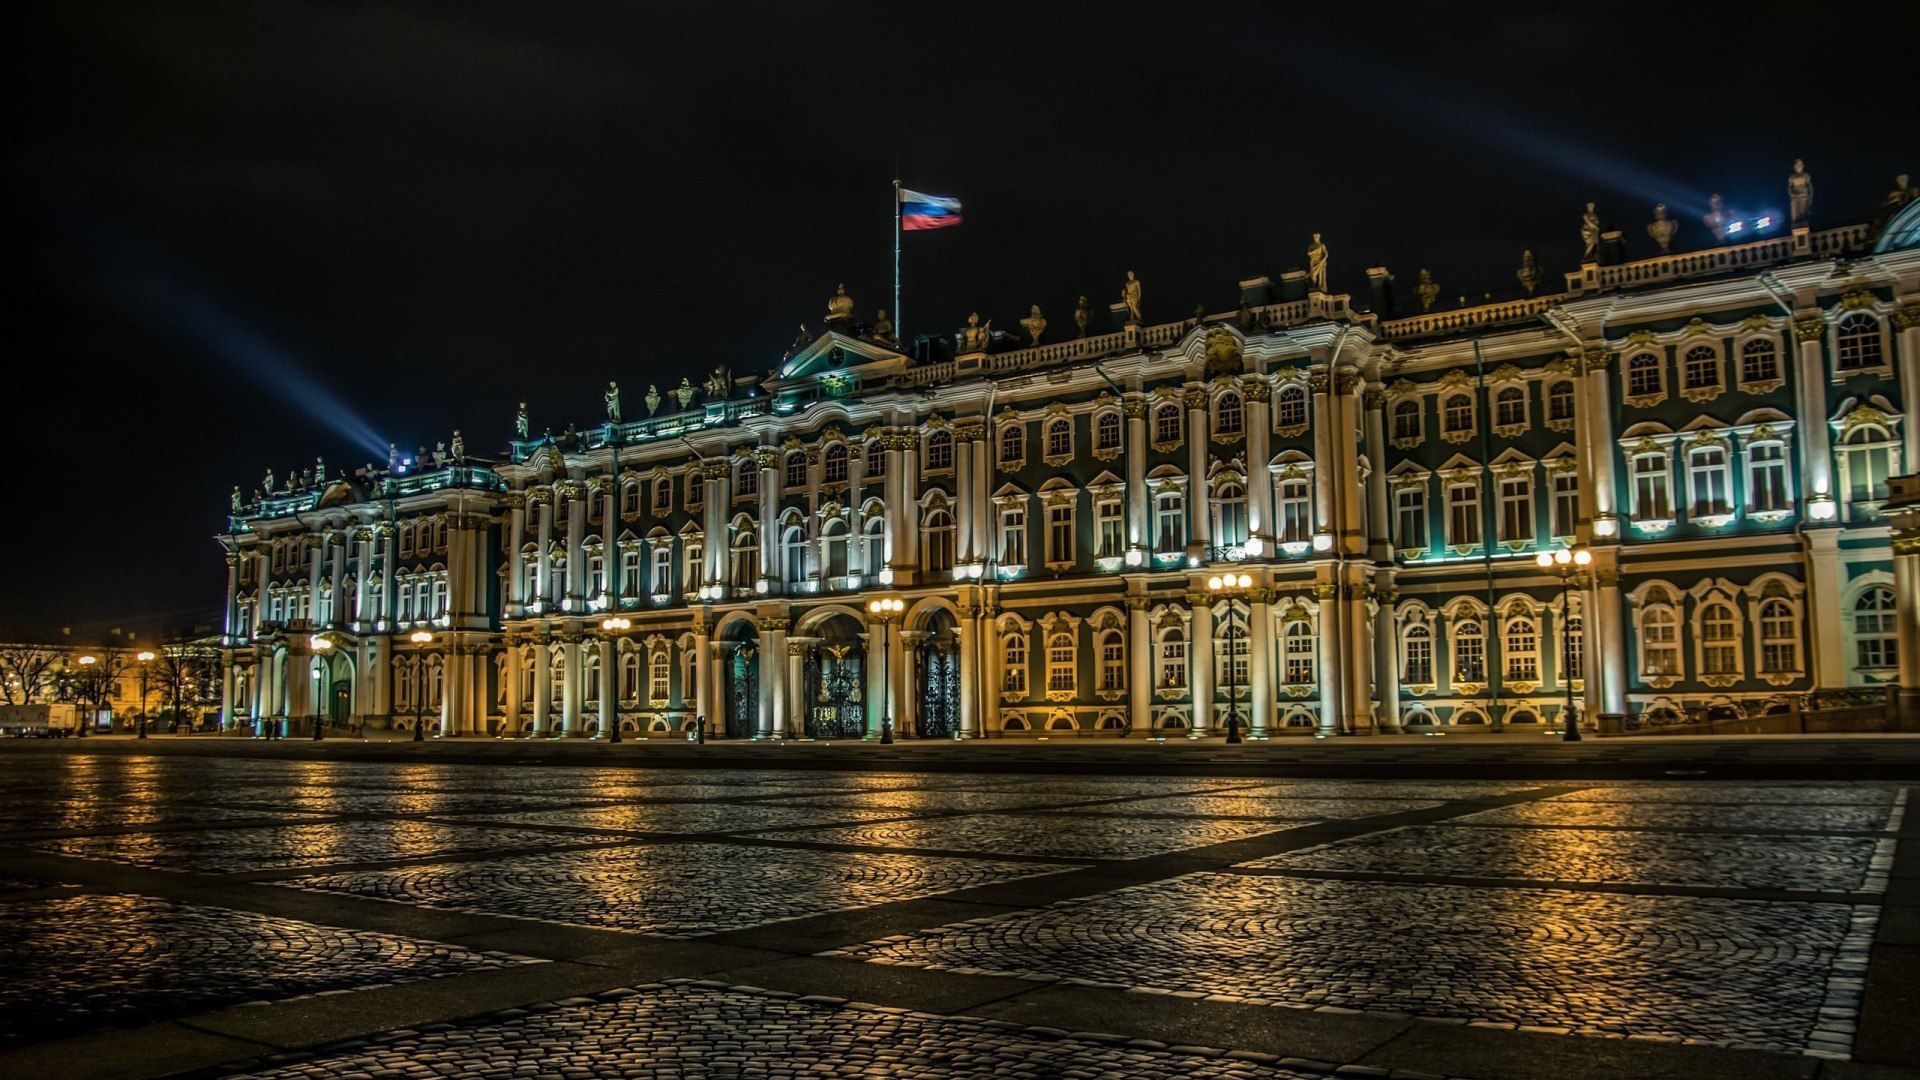 The State Hermitage Museum in St. Petersburg wallpaper and image, picture, photo